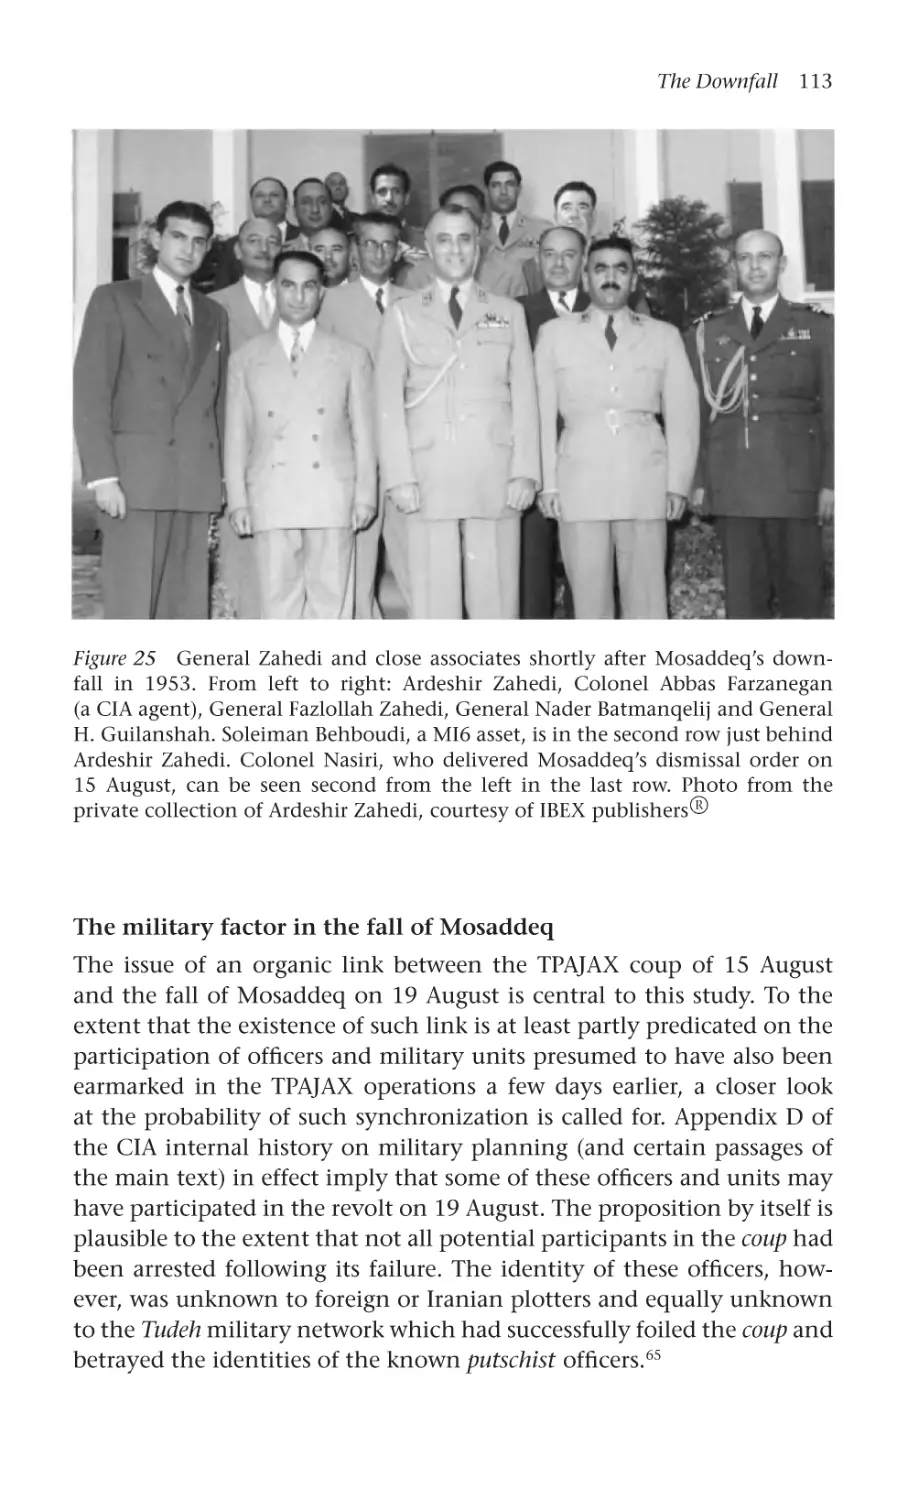 The military factor in the fall of Mosaddeq